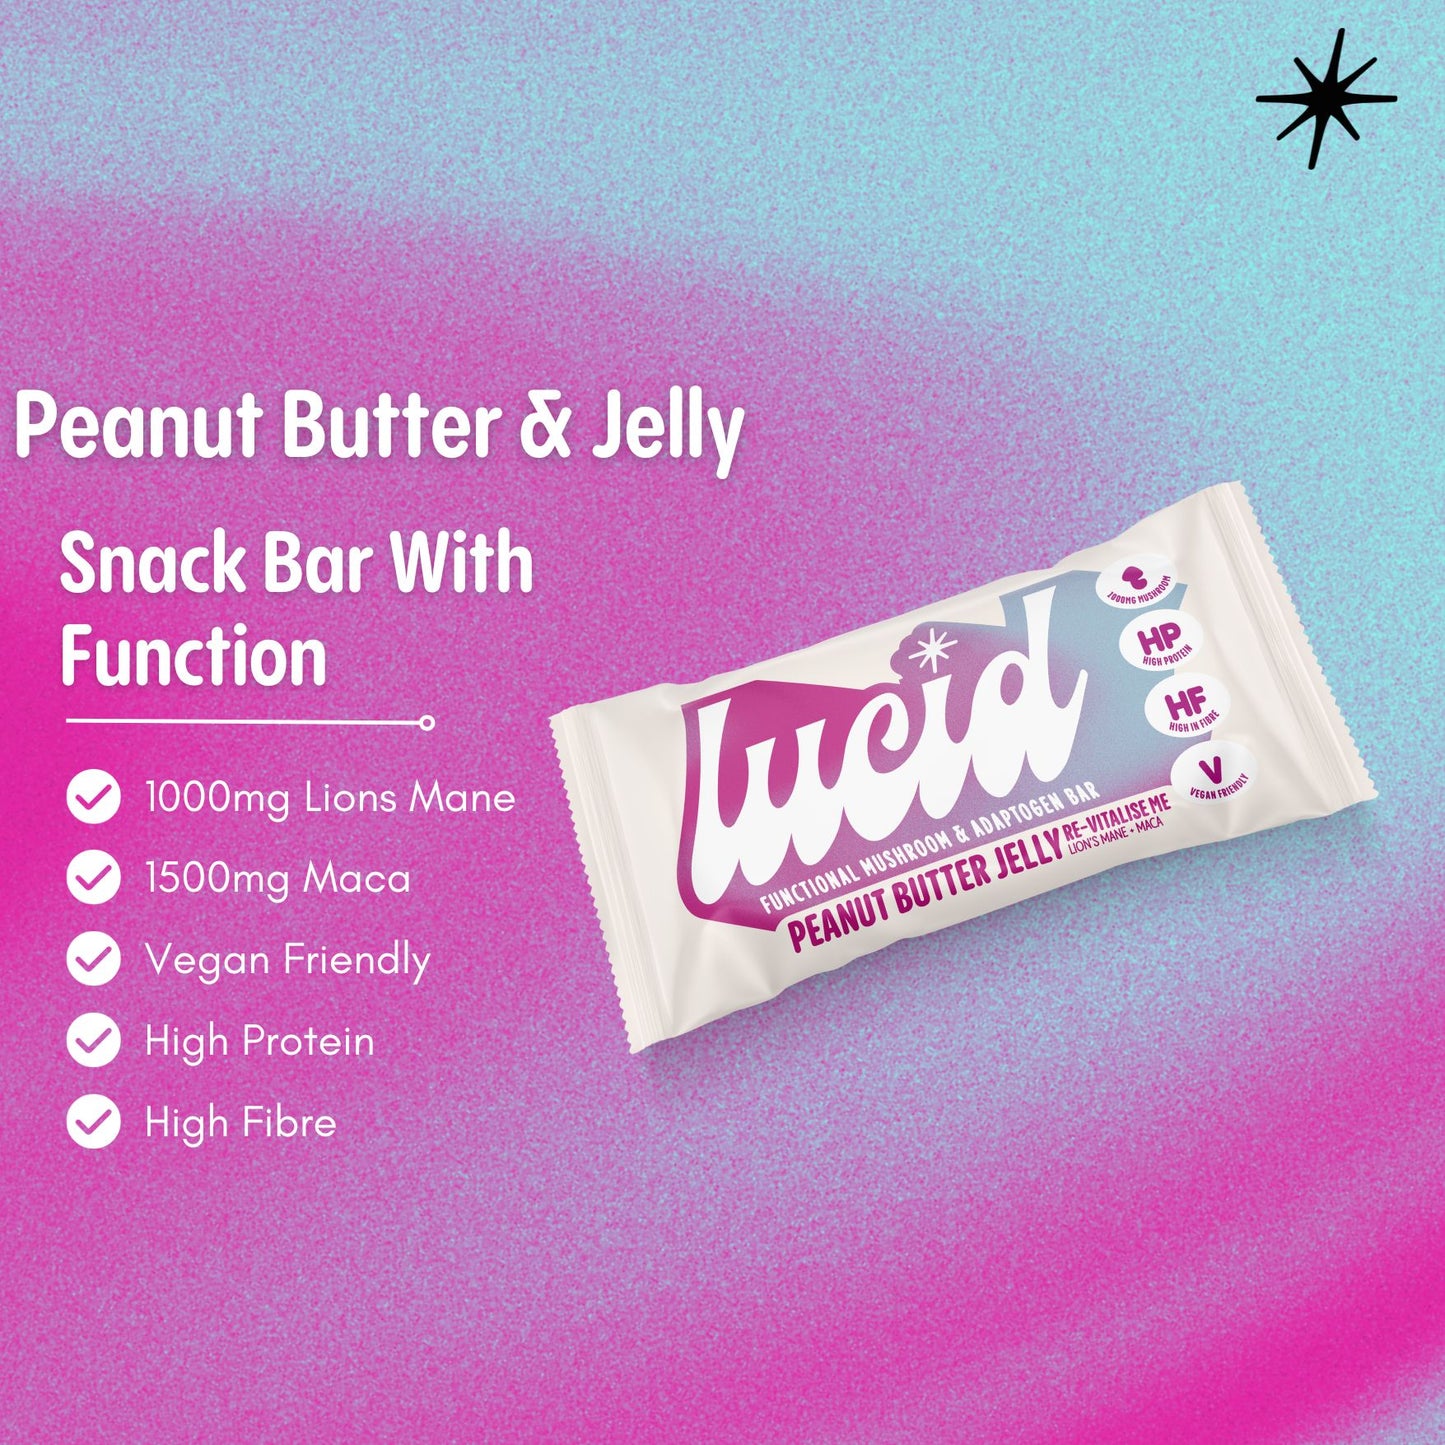 Lucid bar with distinct peanut butter and jelly swirl pattern backdrop, highlighting key USPs like 'functional mushrooms and adaptogens', 'vegan friendly', and 'high-fibre'. Premium health snack for mindful consumption.